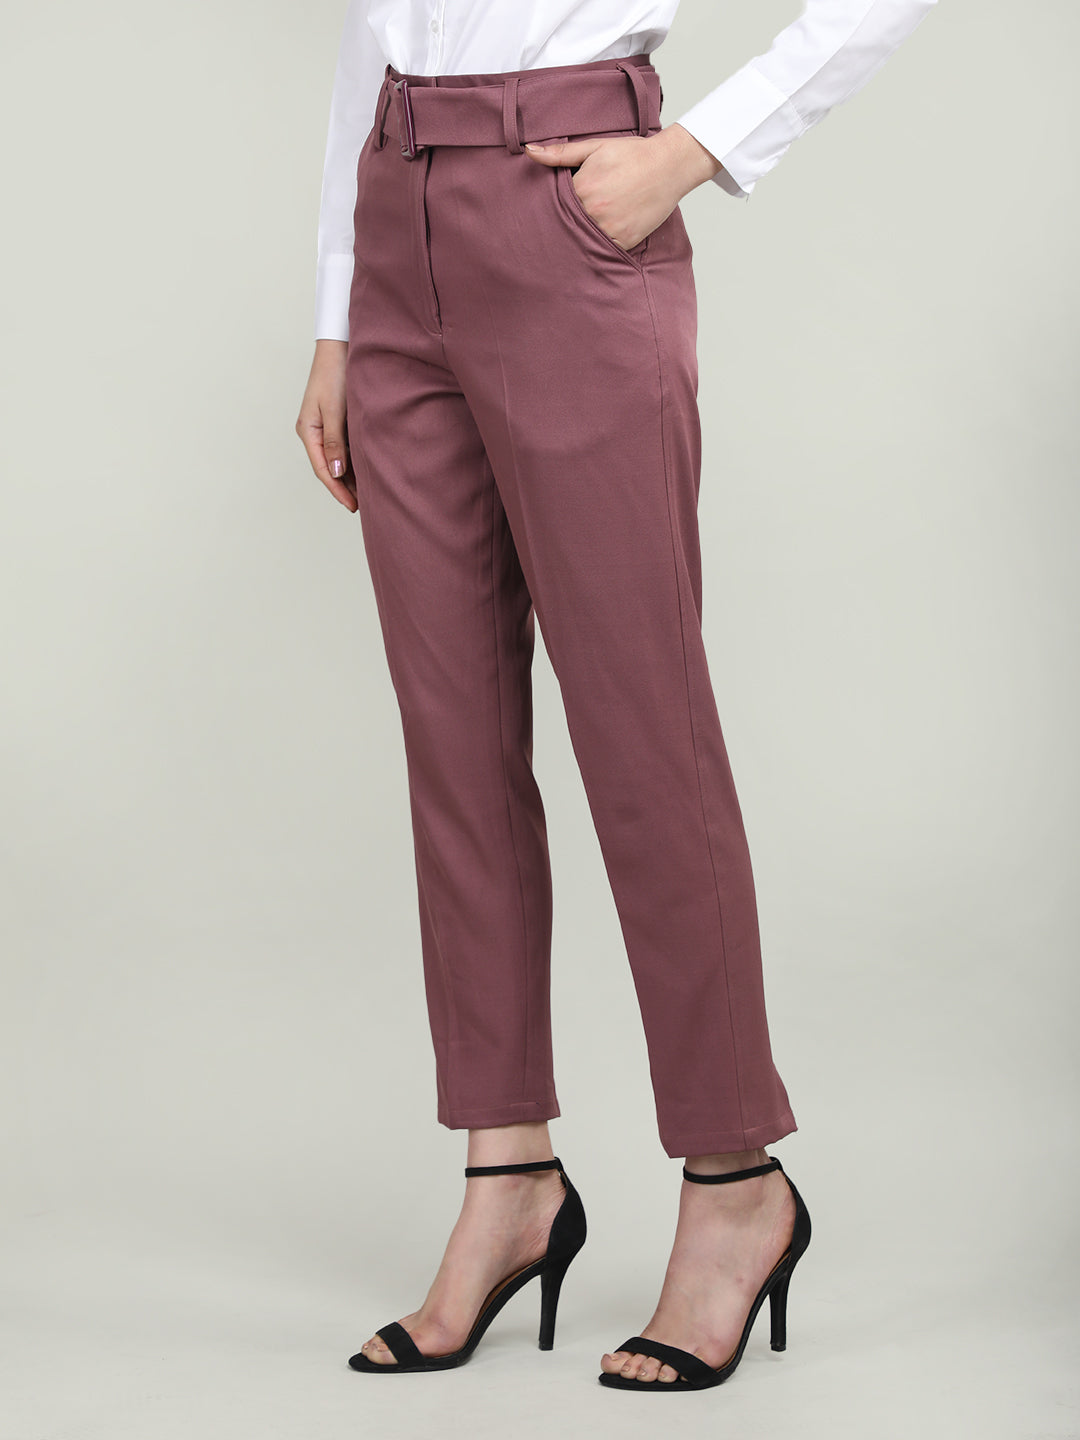 Wide trousers with side stripe - Burgundy/Powder - Ladies | H&M IE